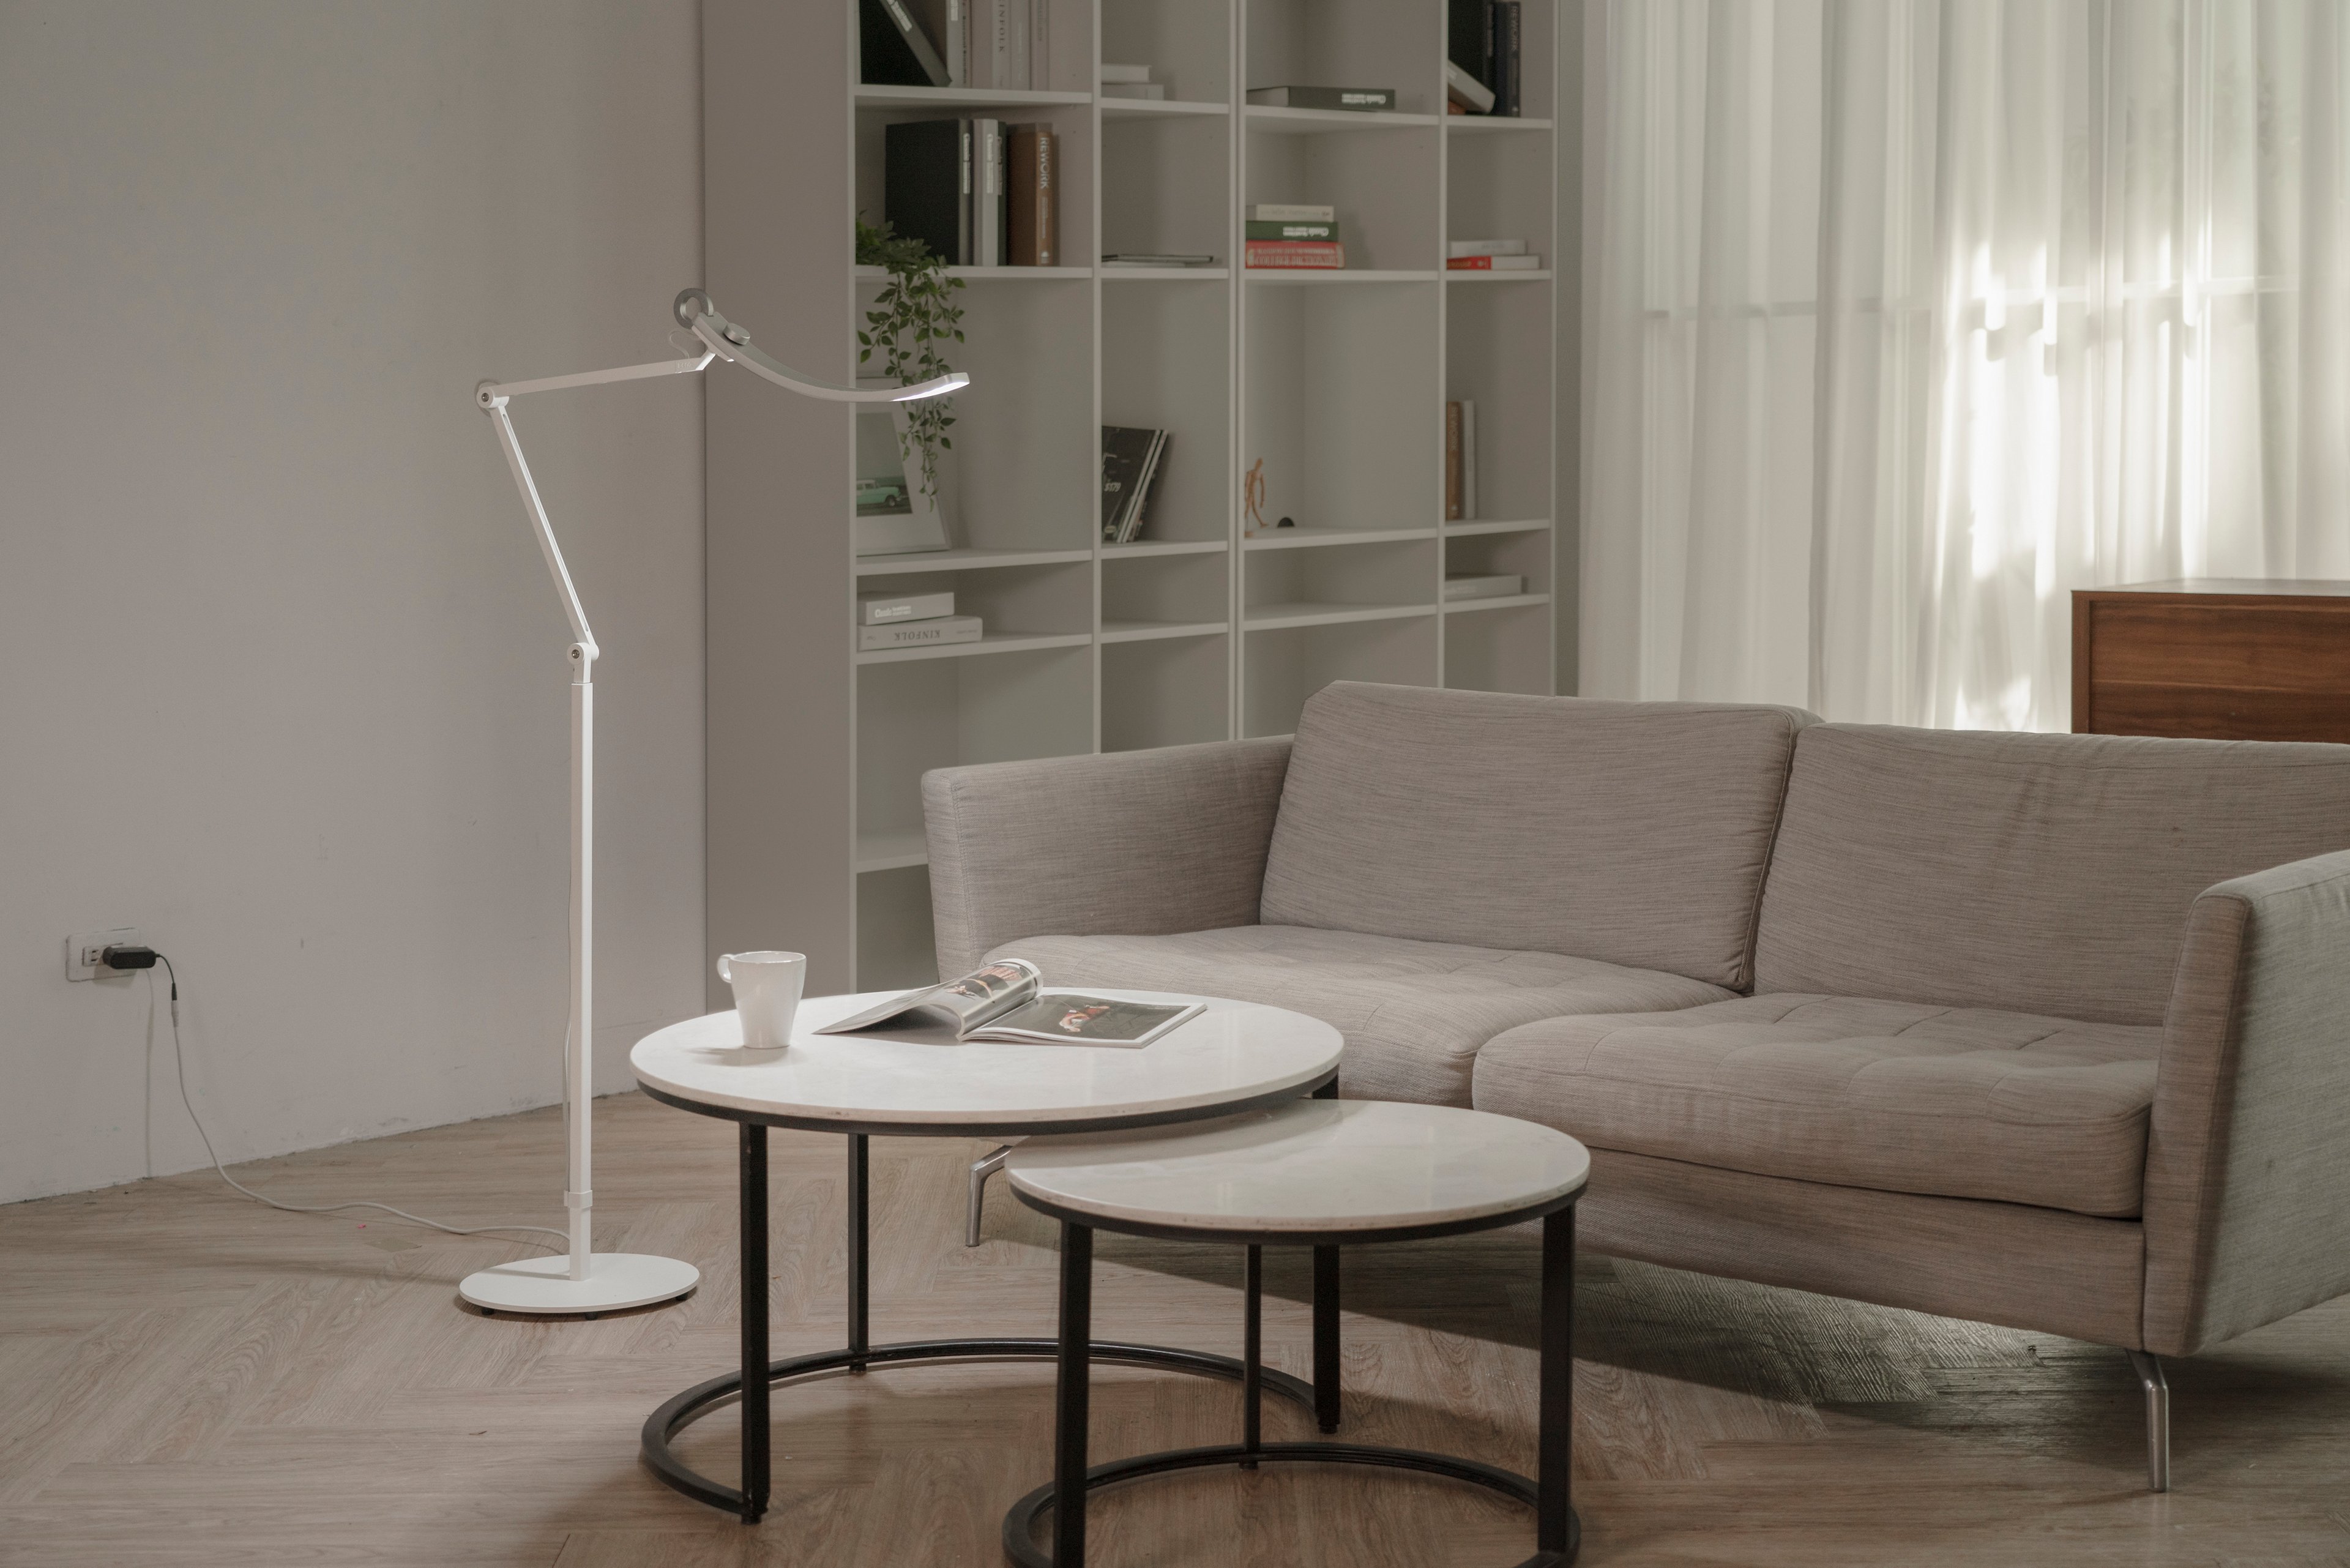 Floor Lamp Placement 101: Where To Put A Floor Lamp In The Living Room? |  Benq Us